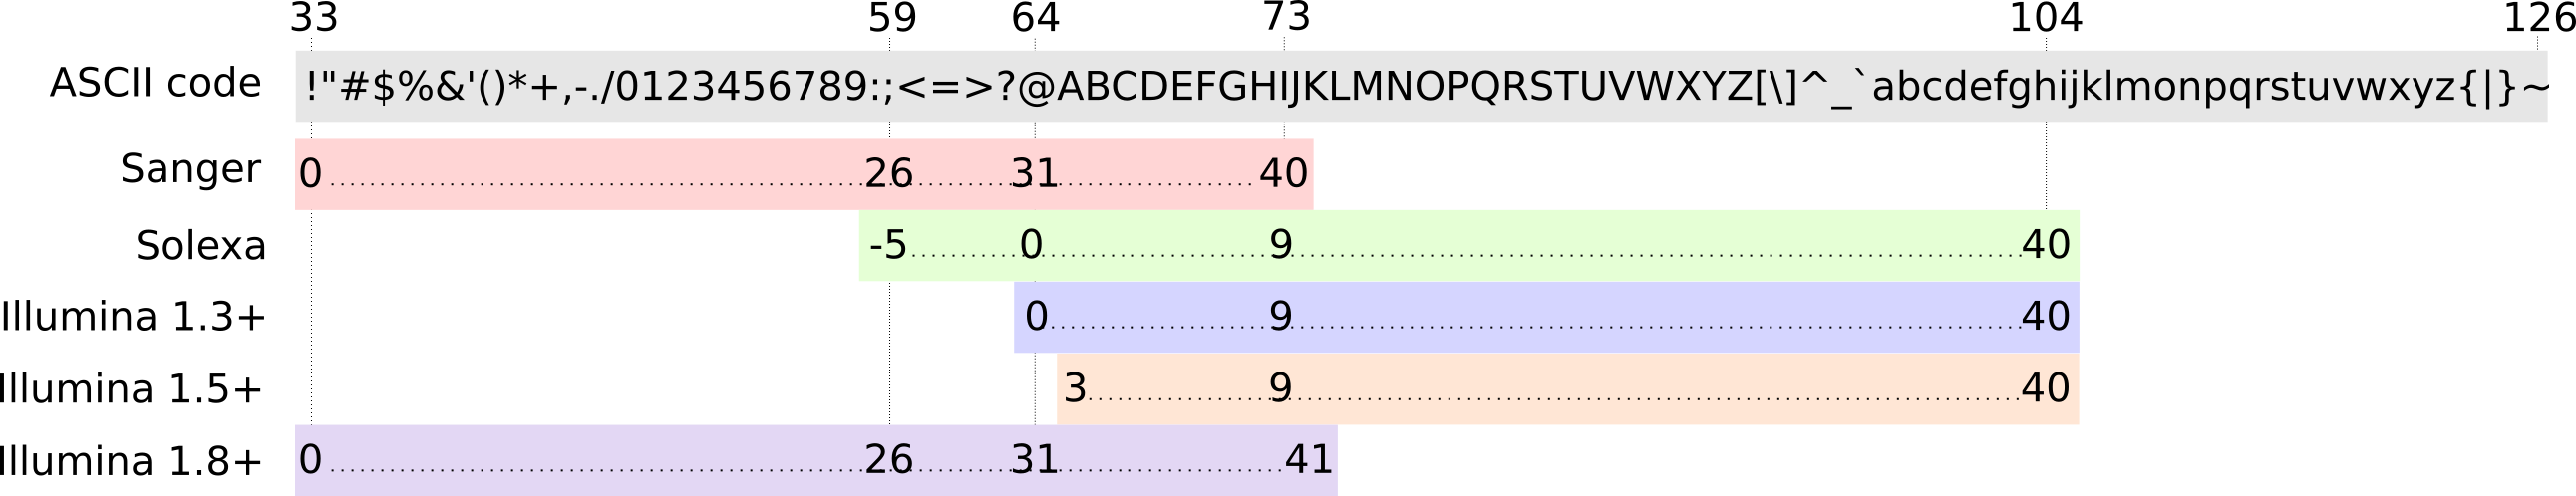 Encoding of the quality score with ASCII characters for different Phred encoding. The ascii code sequence is shown at the top with symbols for 33 to 64, upper case letters, more symbols, and then lowercase letters. Sanger maps from 33 to 73 while solexa is shifted, starting at 59 and going to 104. Illumina 1.3 starts at 54 and goes to 104, Illumina 1.5 is shifted three scores to the right but still ends at 104. Illumina 1.8+ goes back to the Sanger except one single score wider. Illumina. 